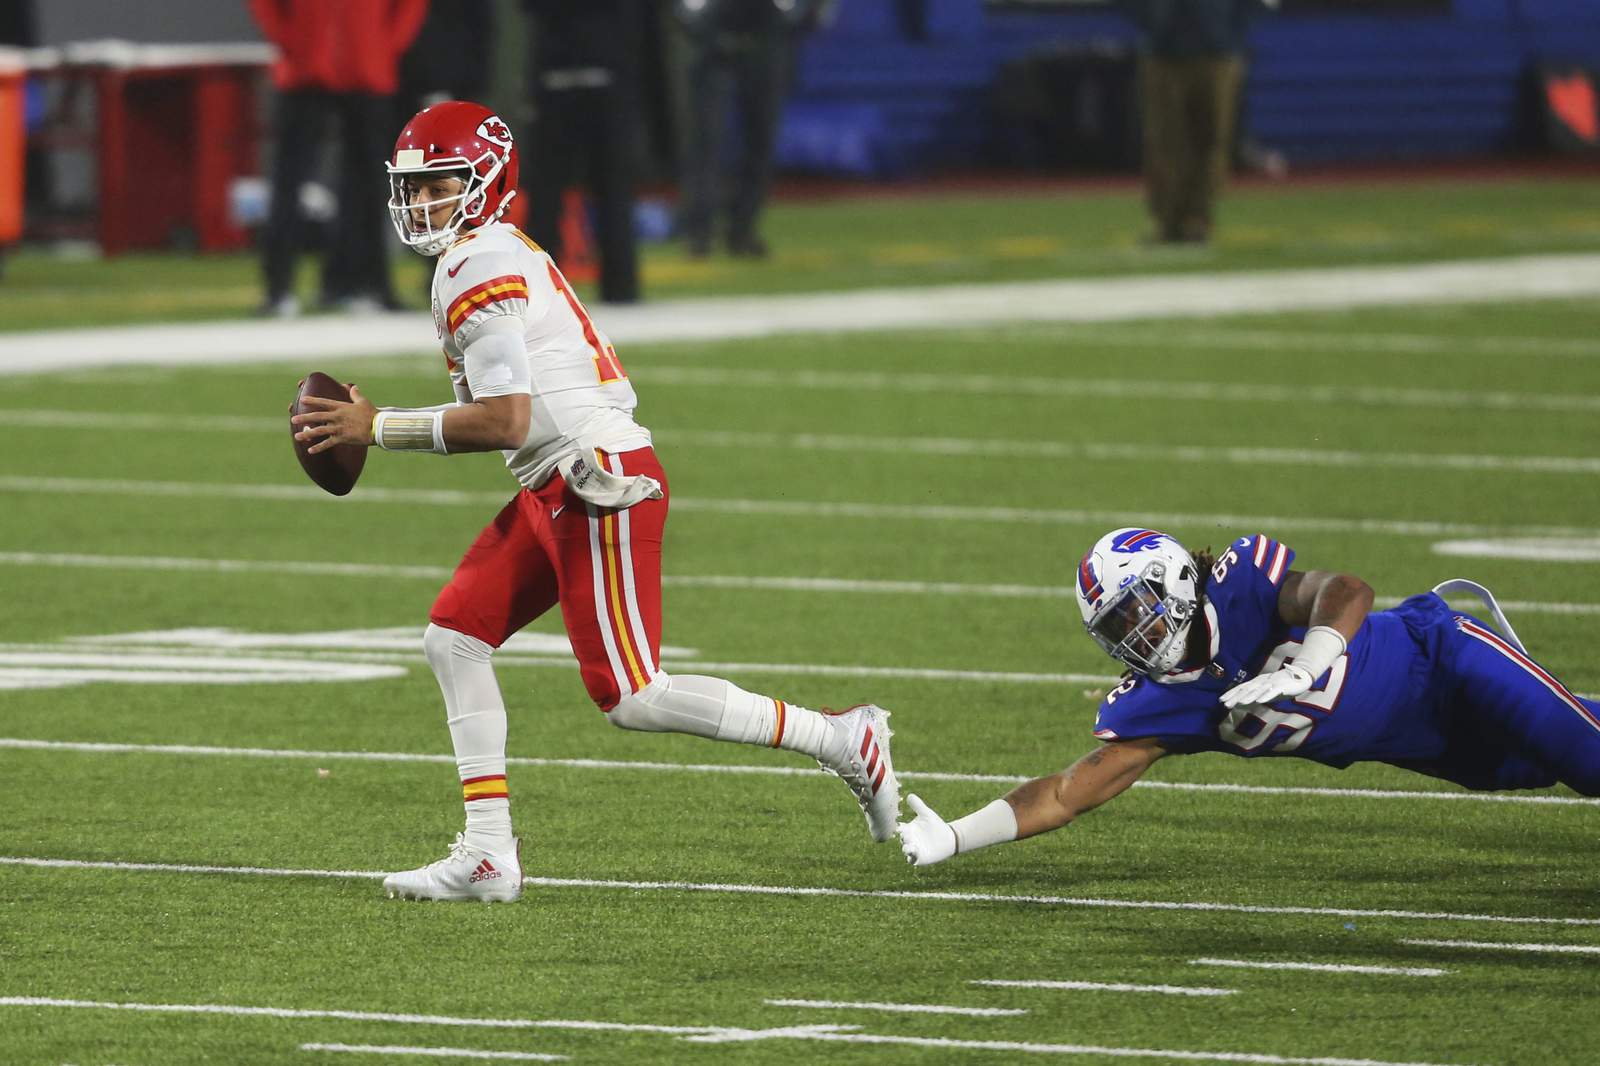 Chiefs quarterback Mahomes continues to progress with time